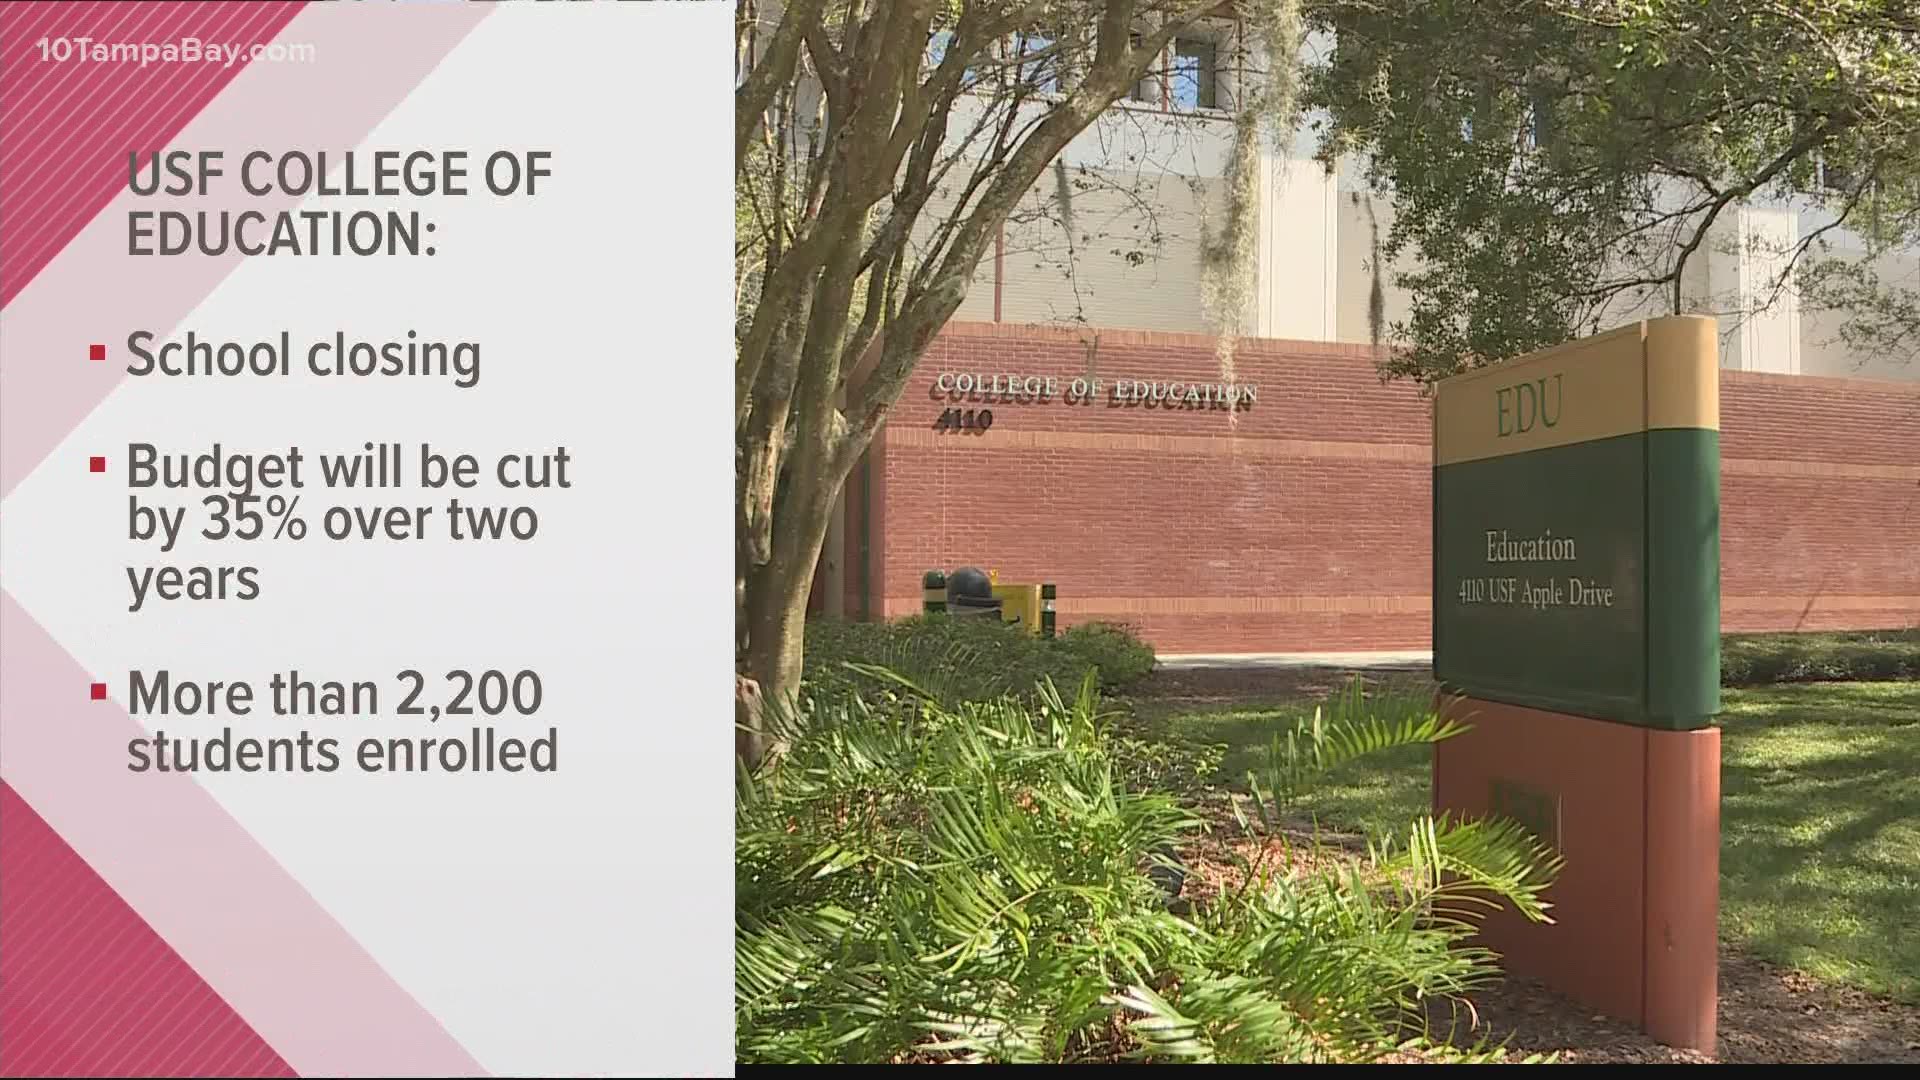 Earlier this month, USF announced it planned to cut $36.7 million from its overall budget.